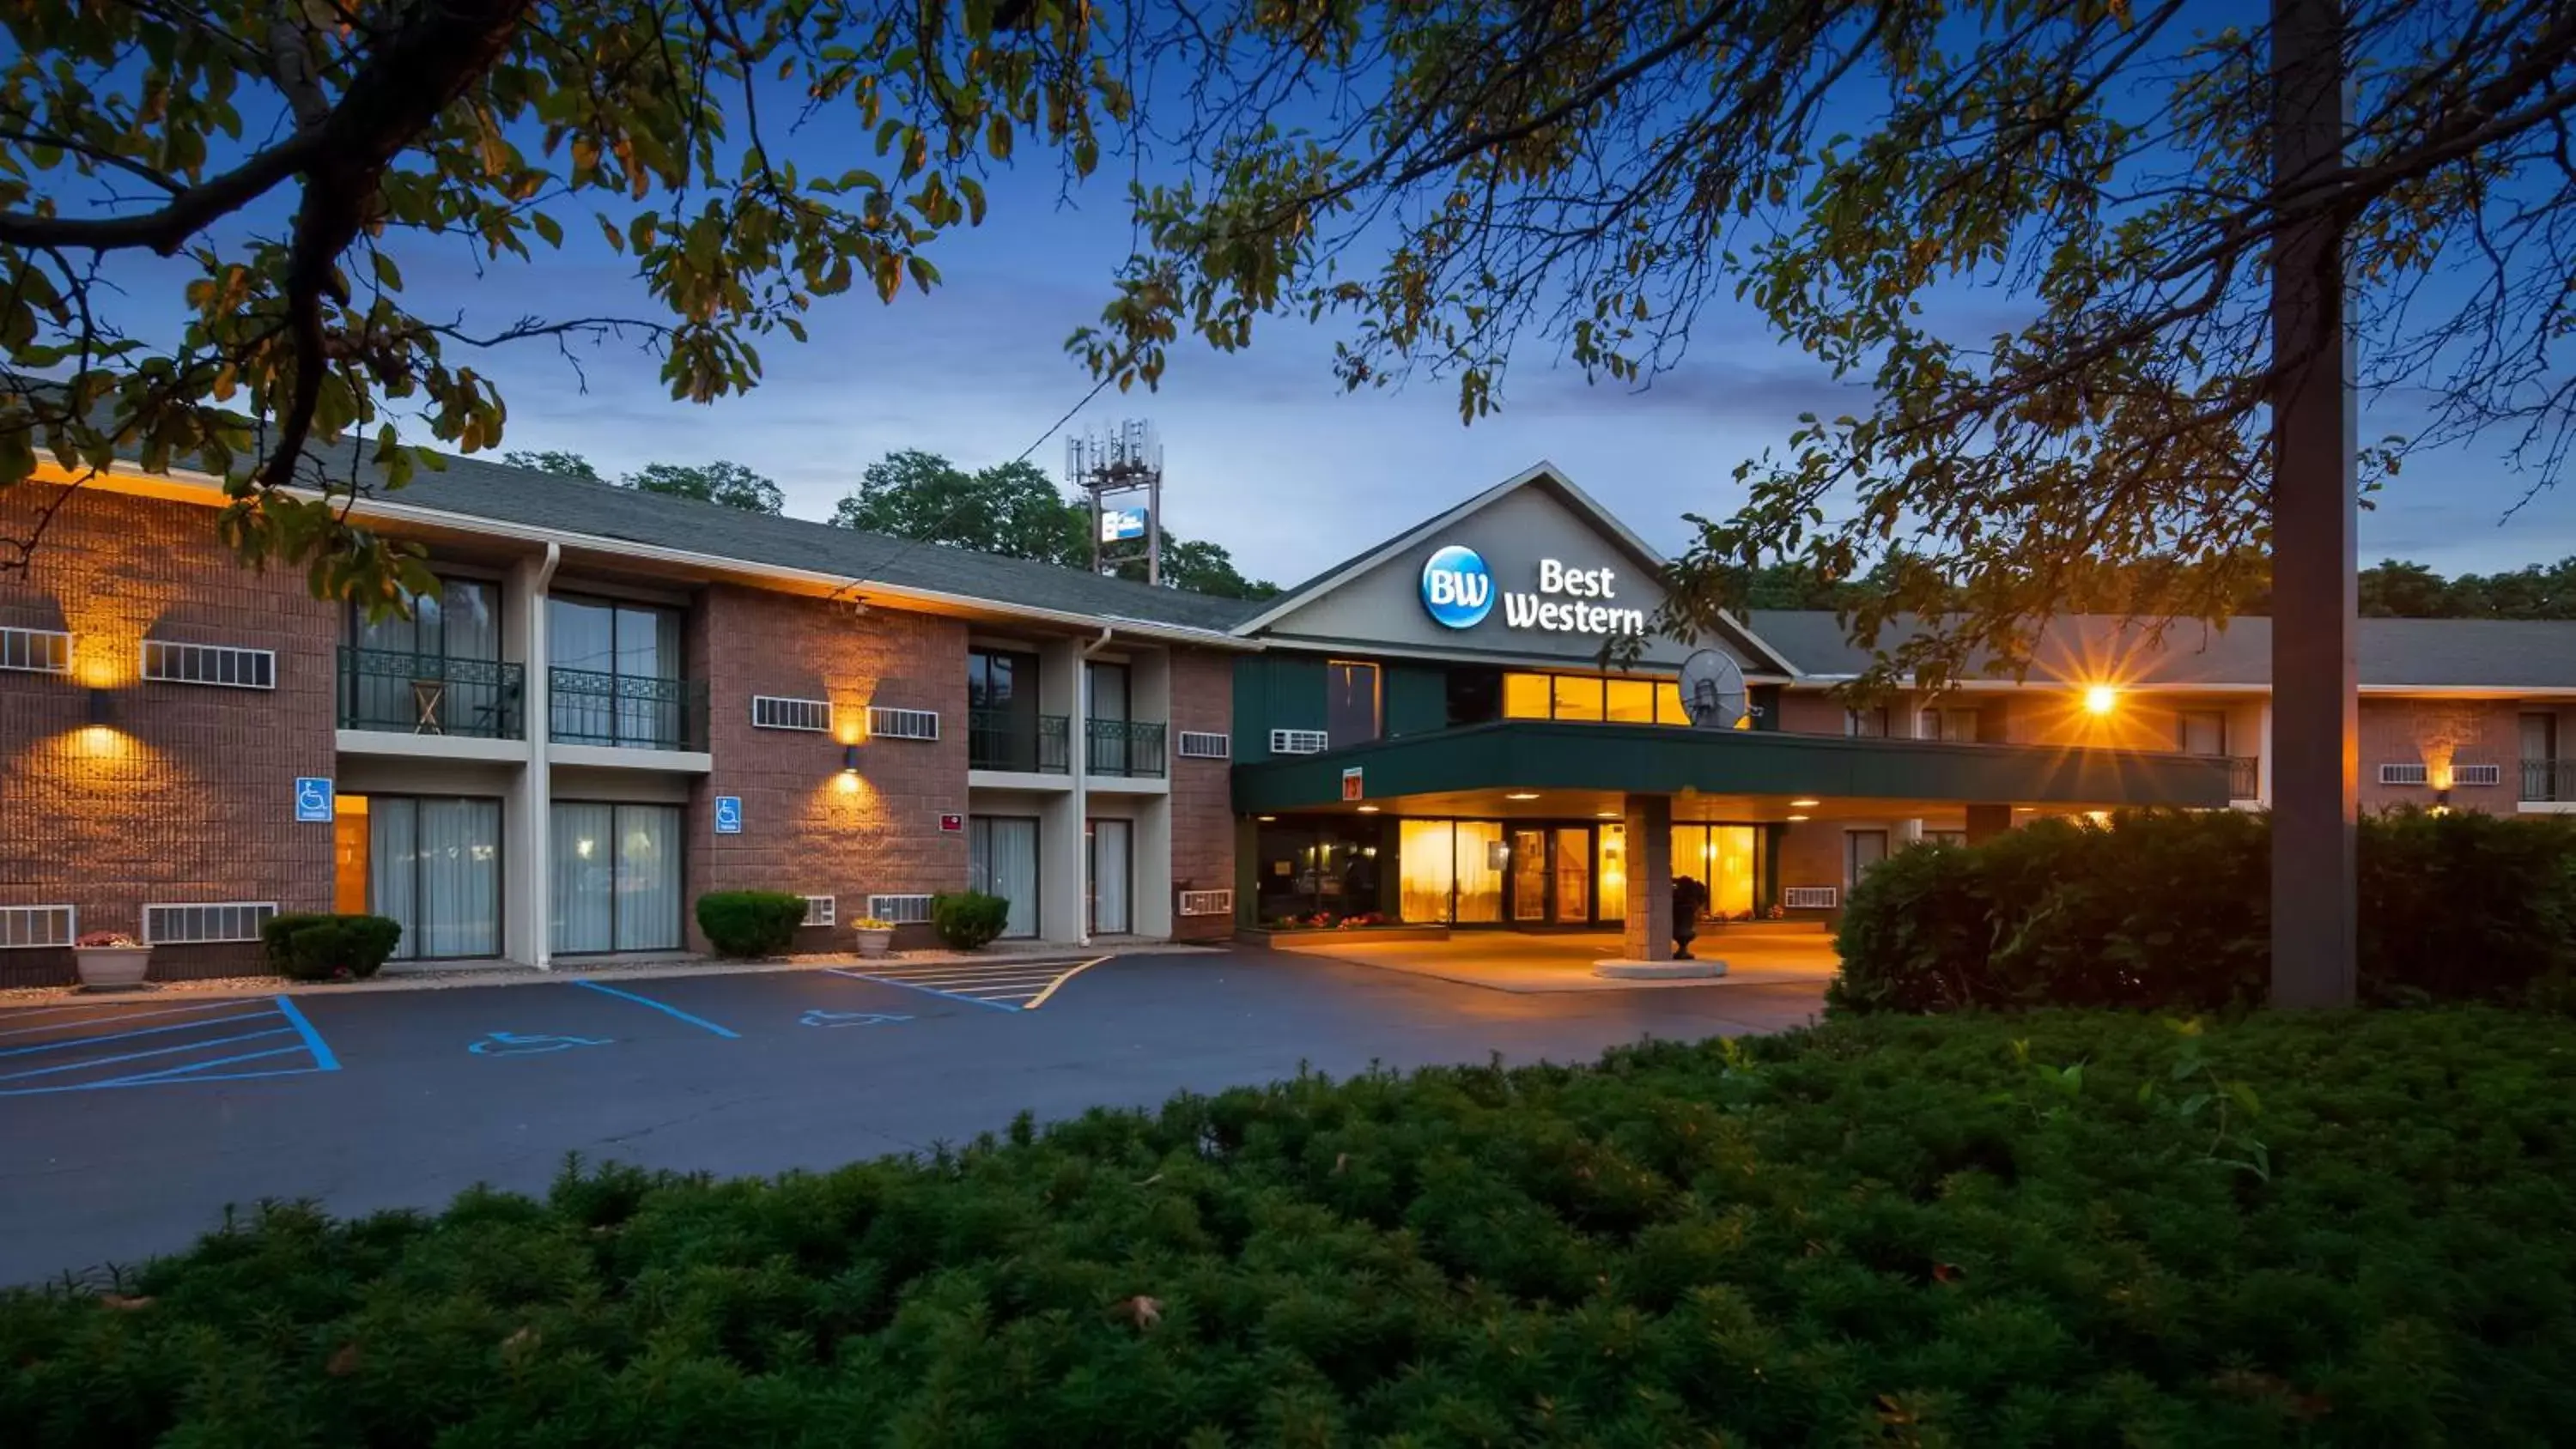 Property Building in Best Western Clifton Park